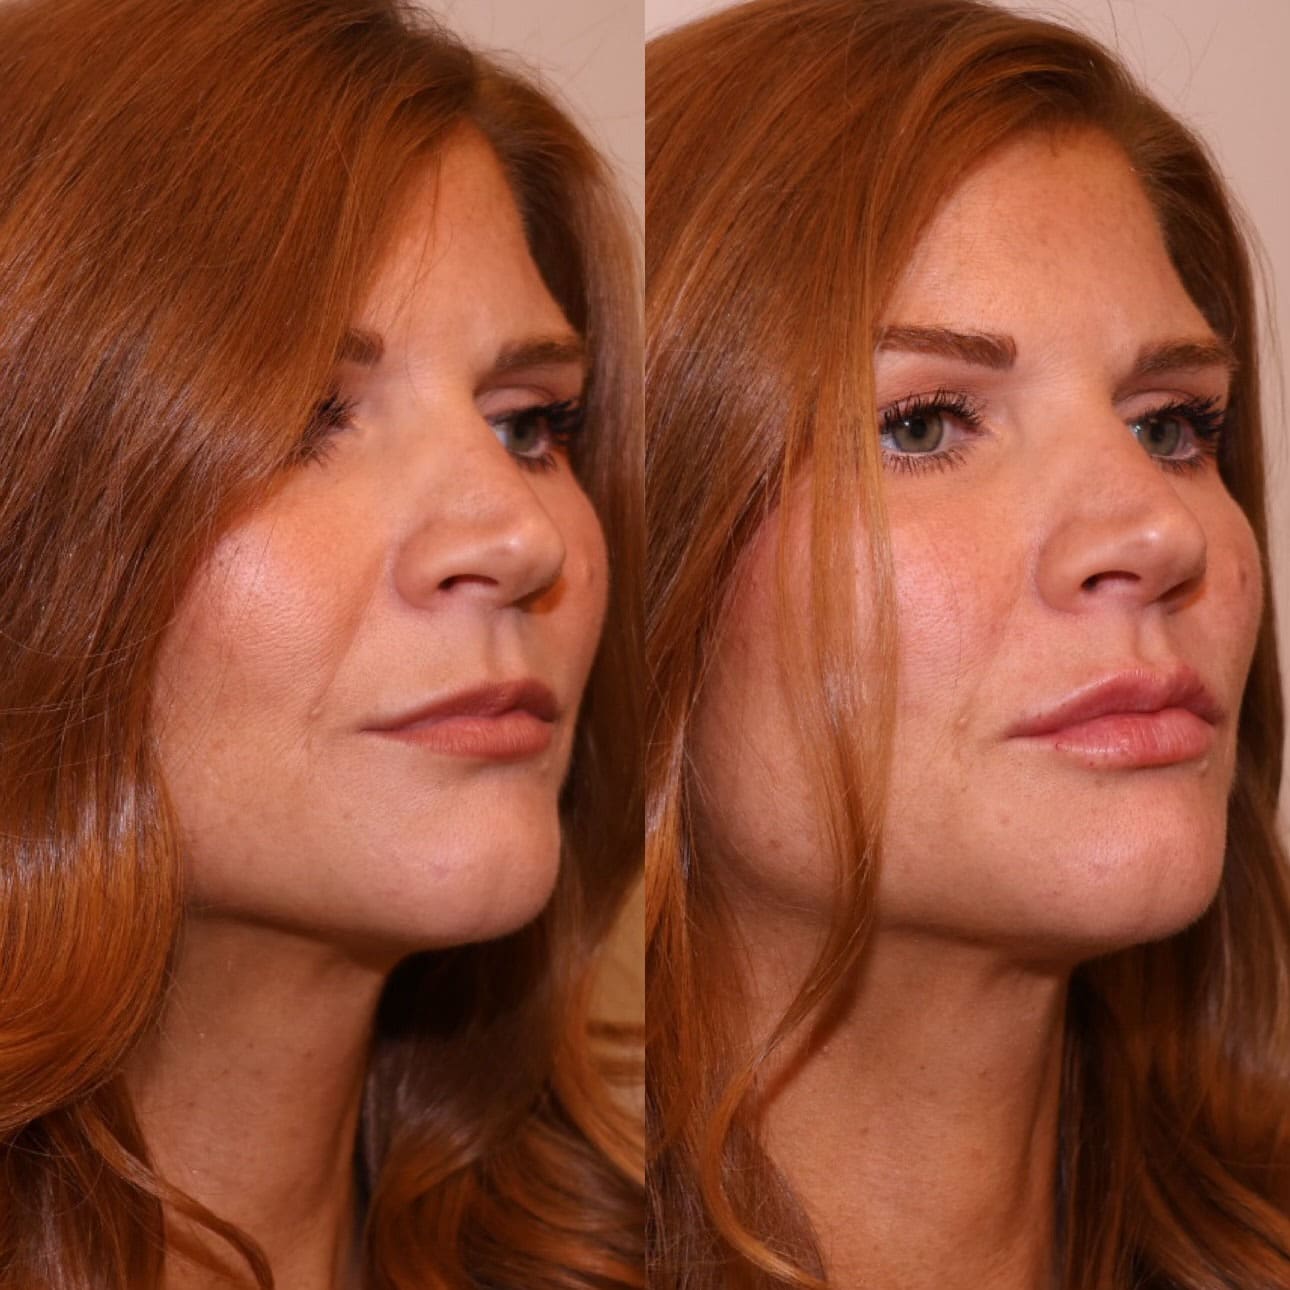 Patient before and after lip filler, side view